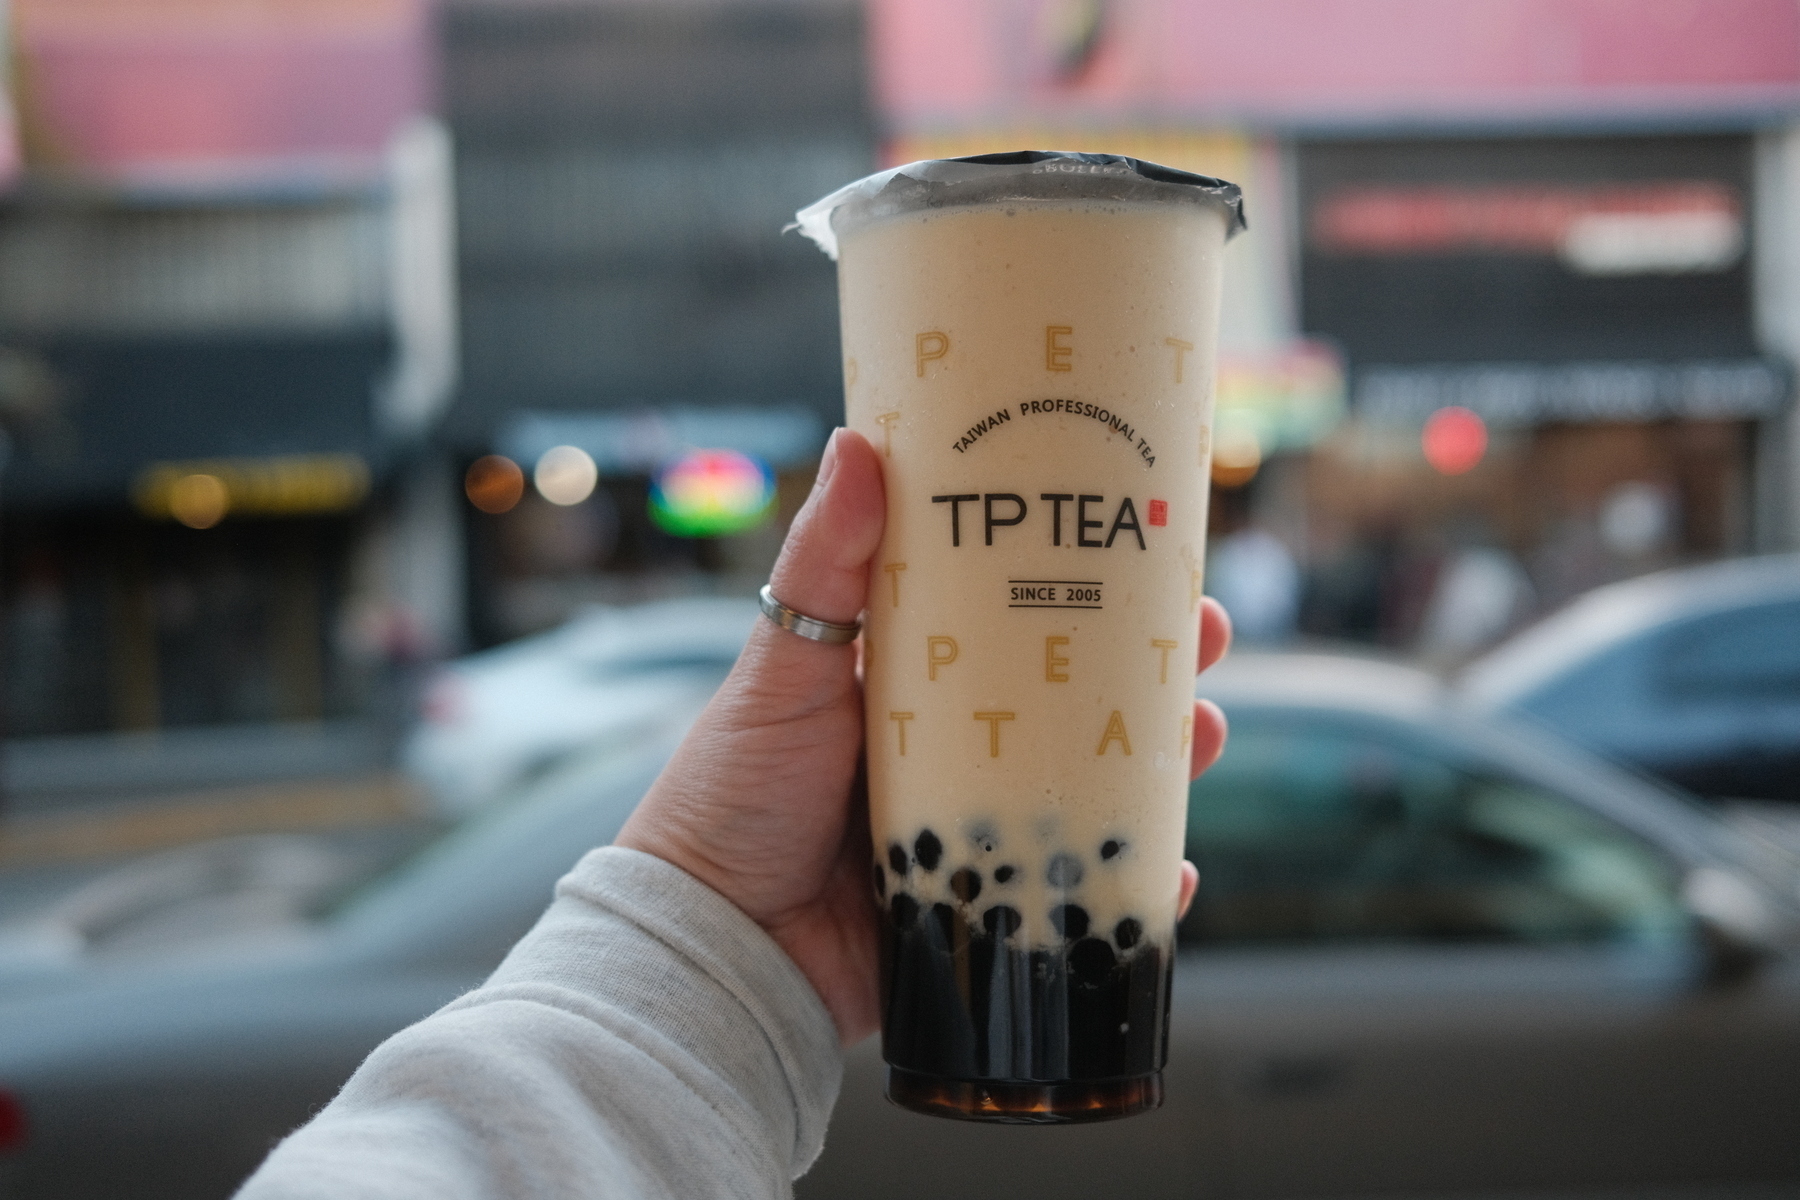 A hand holding a bubble tea. The cup says TP tea and there are tapioca pearls at the bottom of a brown drink.